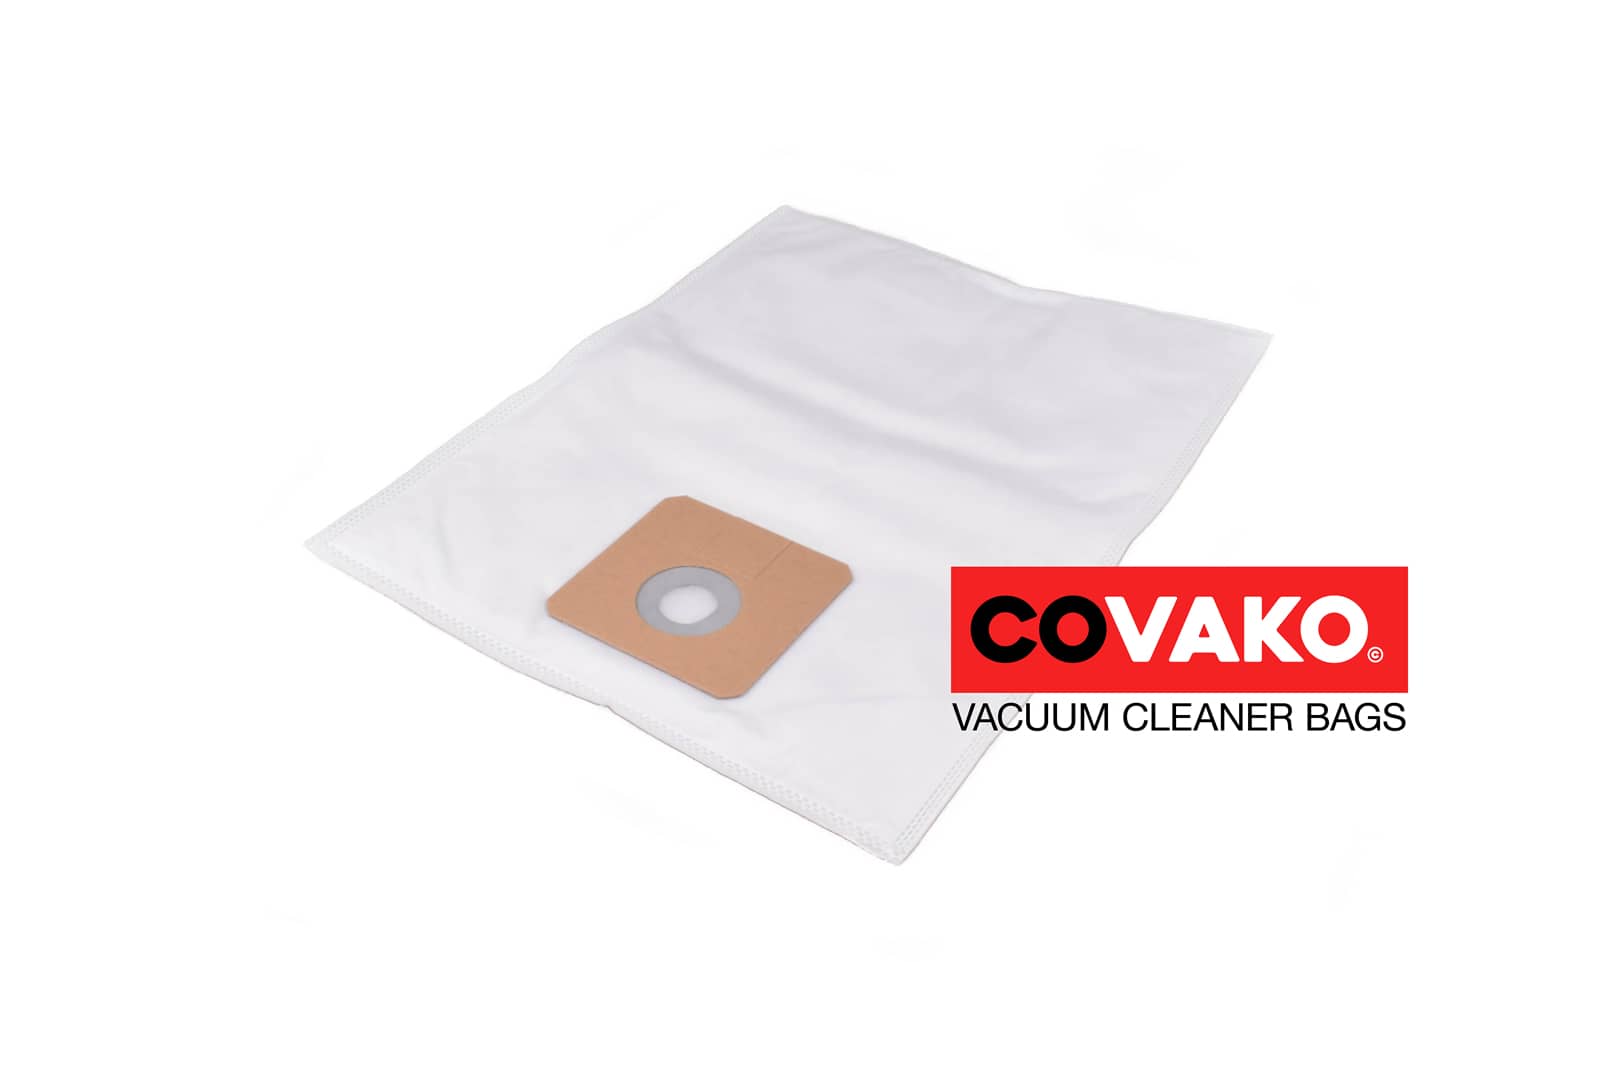 Columbus RS 27 / Synthesis - Columbus vacuum cleaner bags